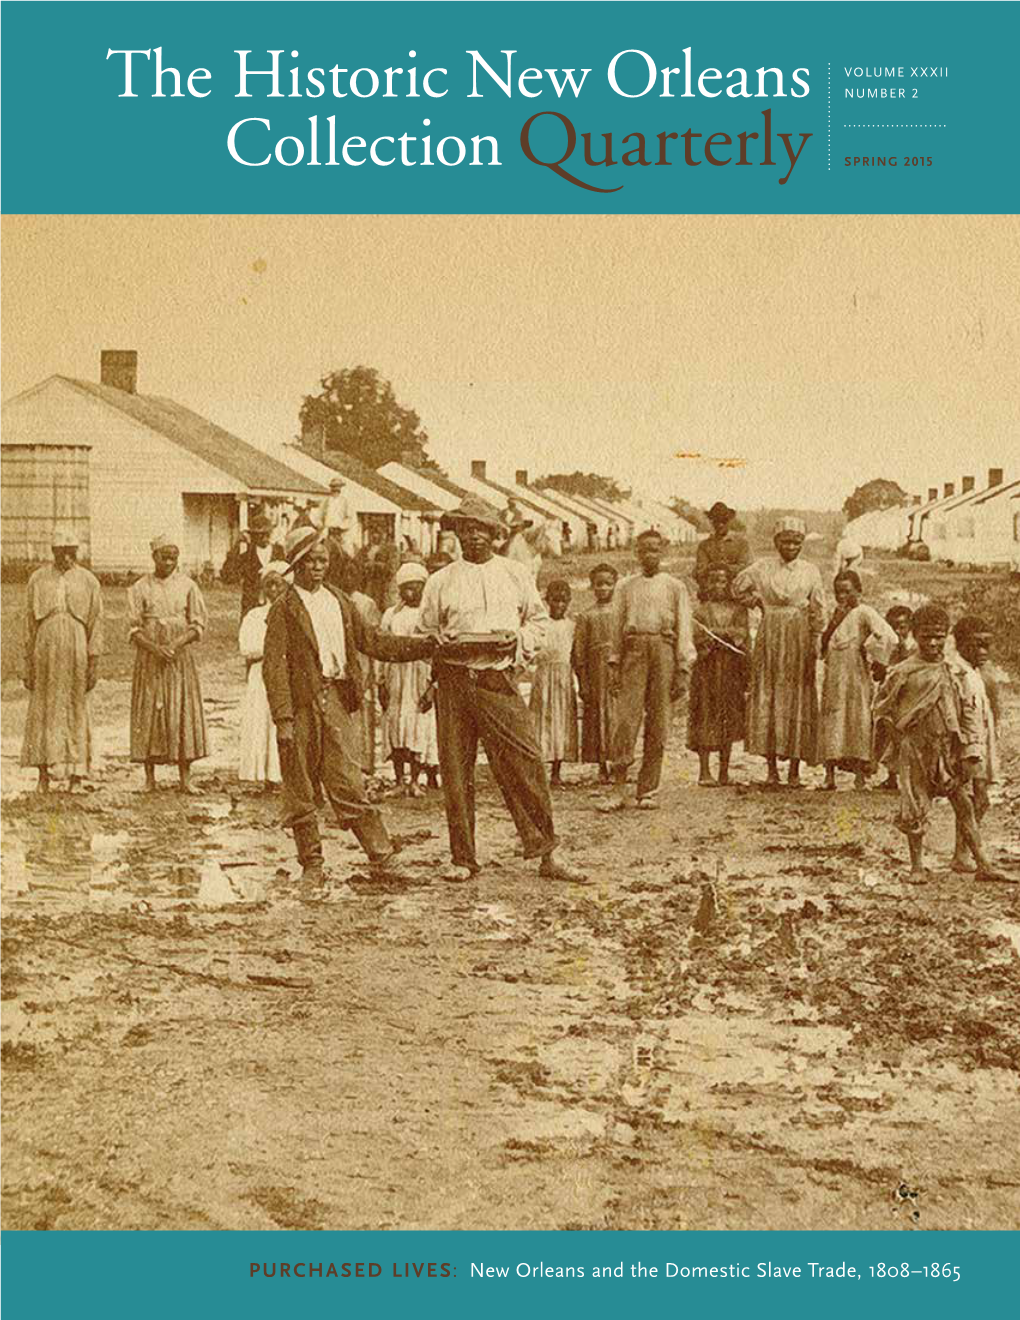 The Historic New Orleans Collection Quarterly